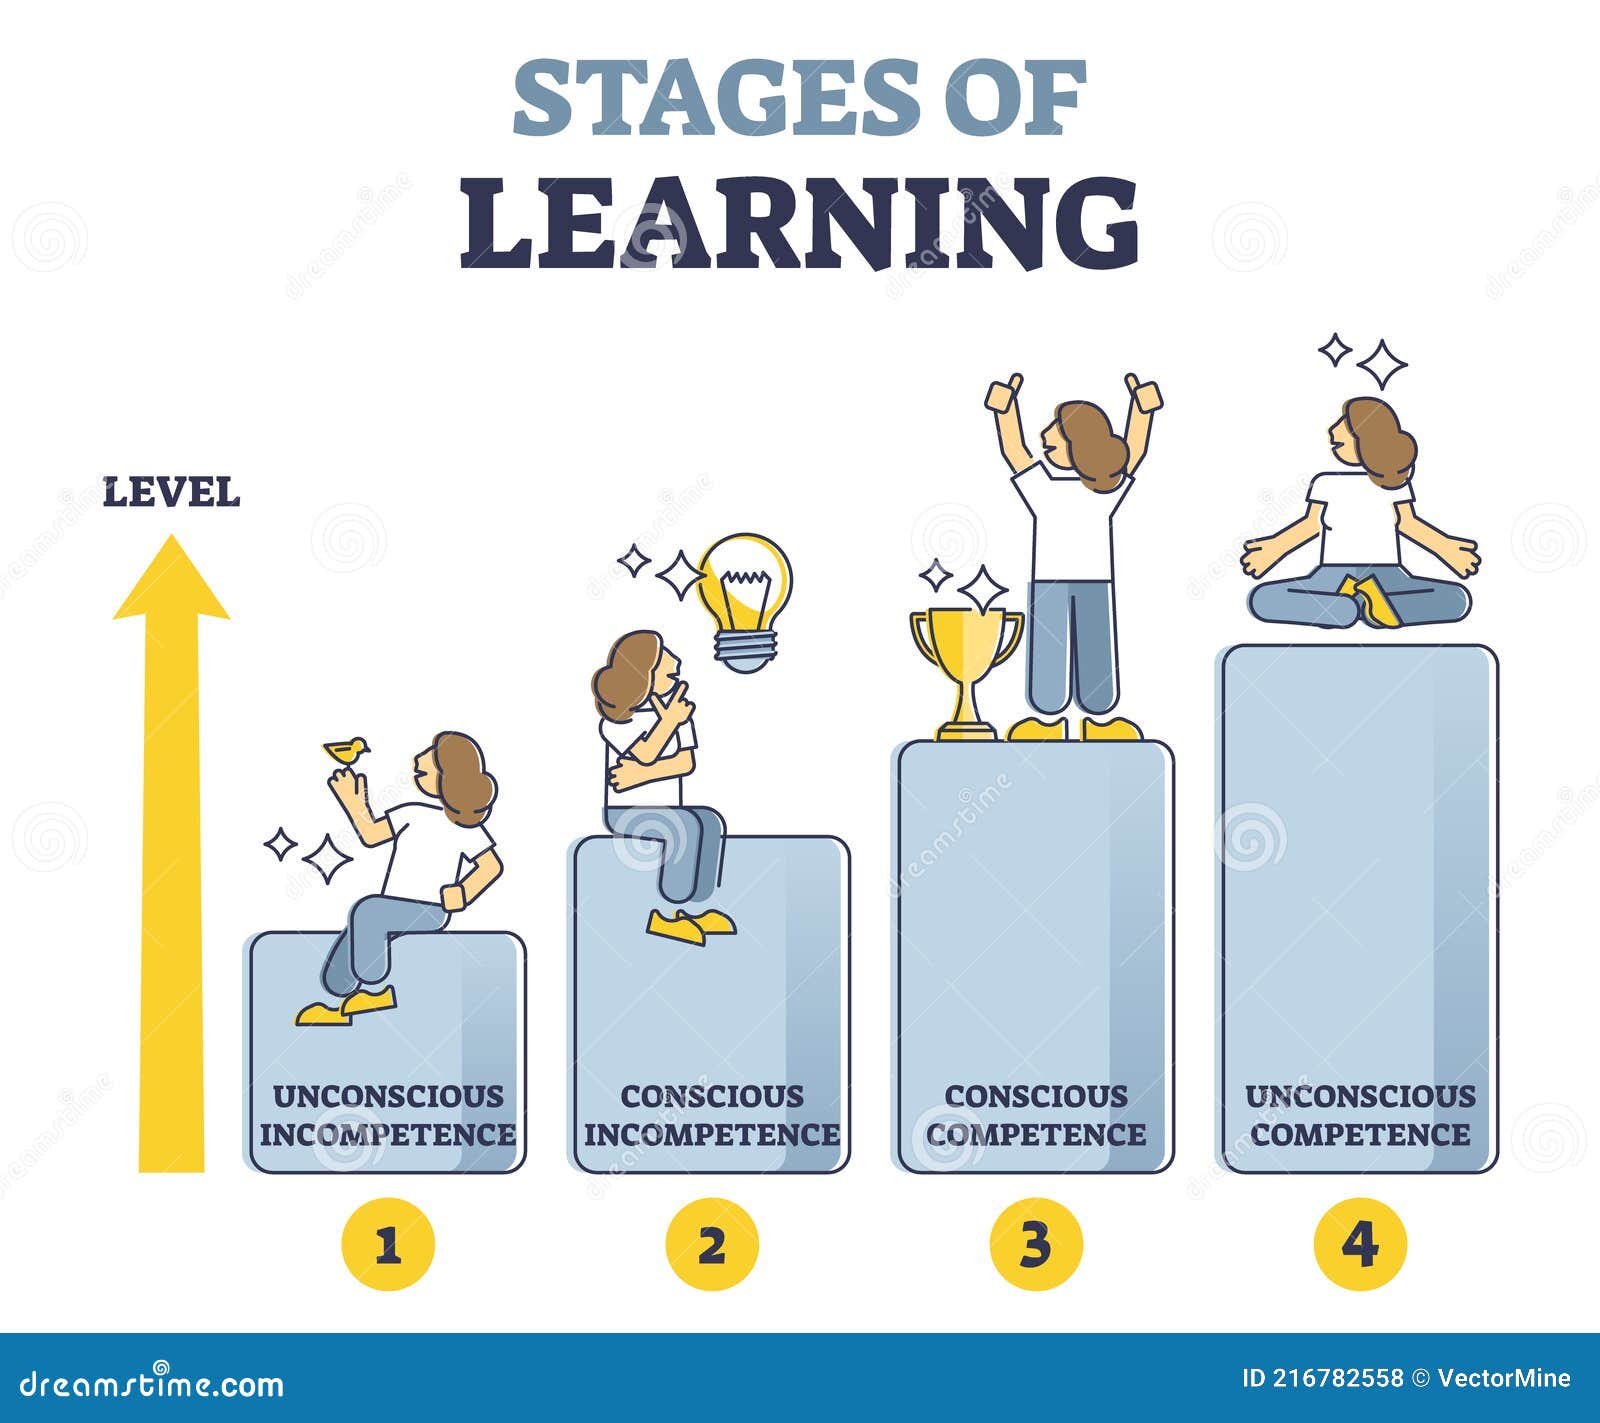 stages of learning experience and unconscious incompetence outline diagram